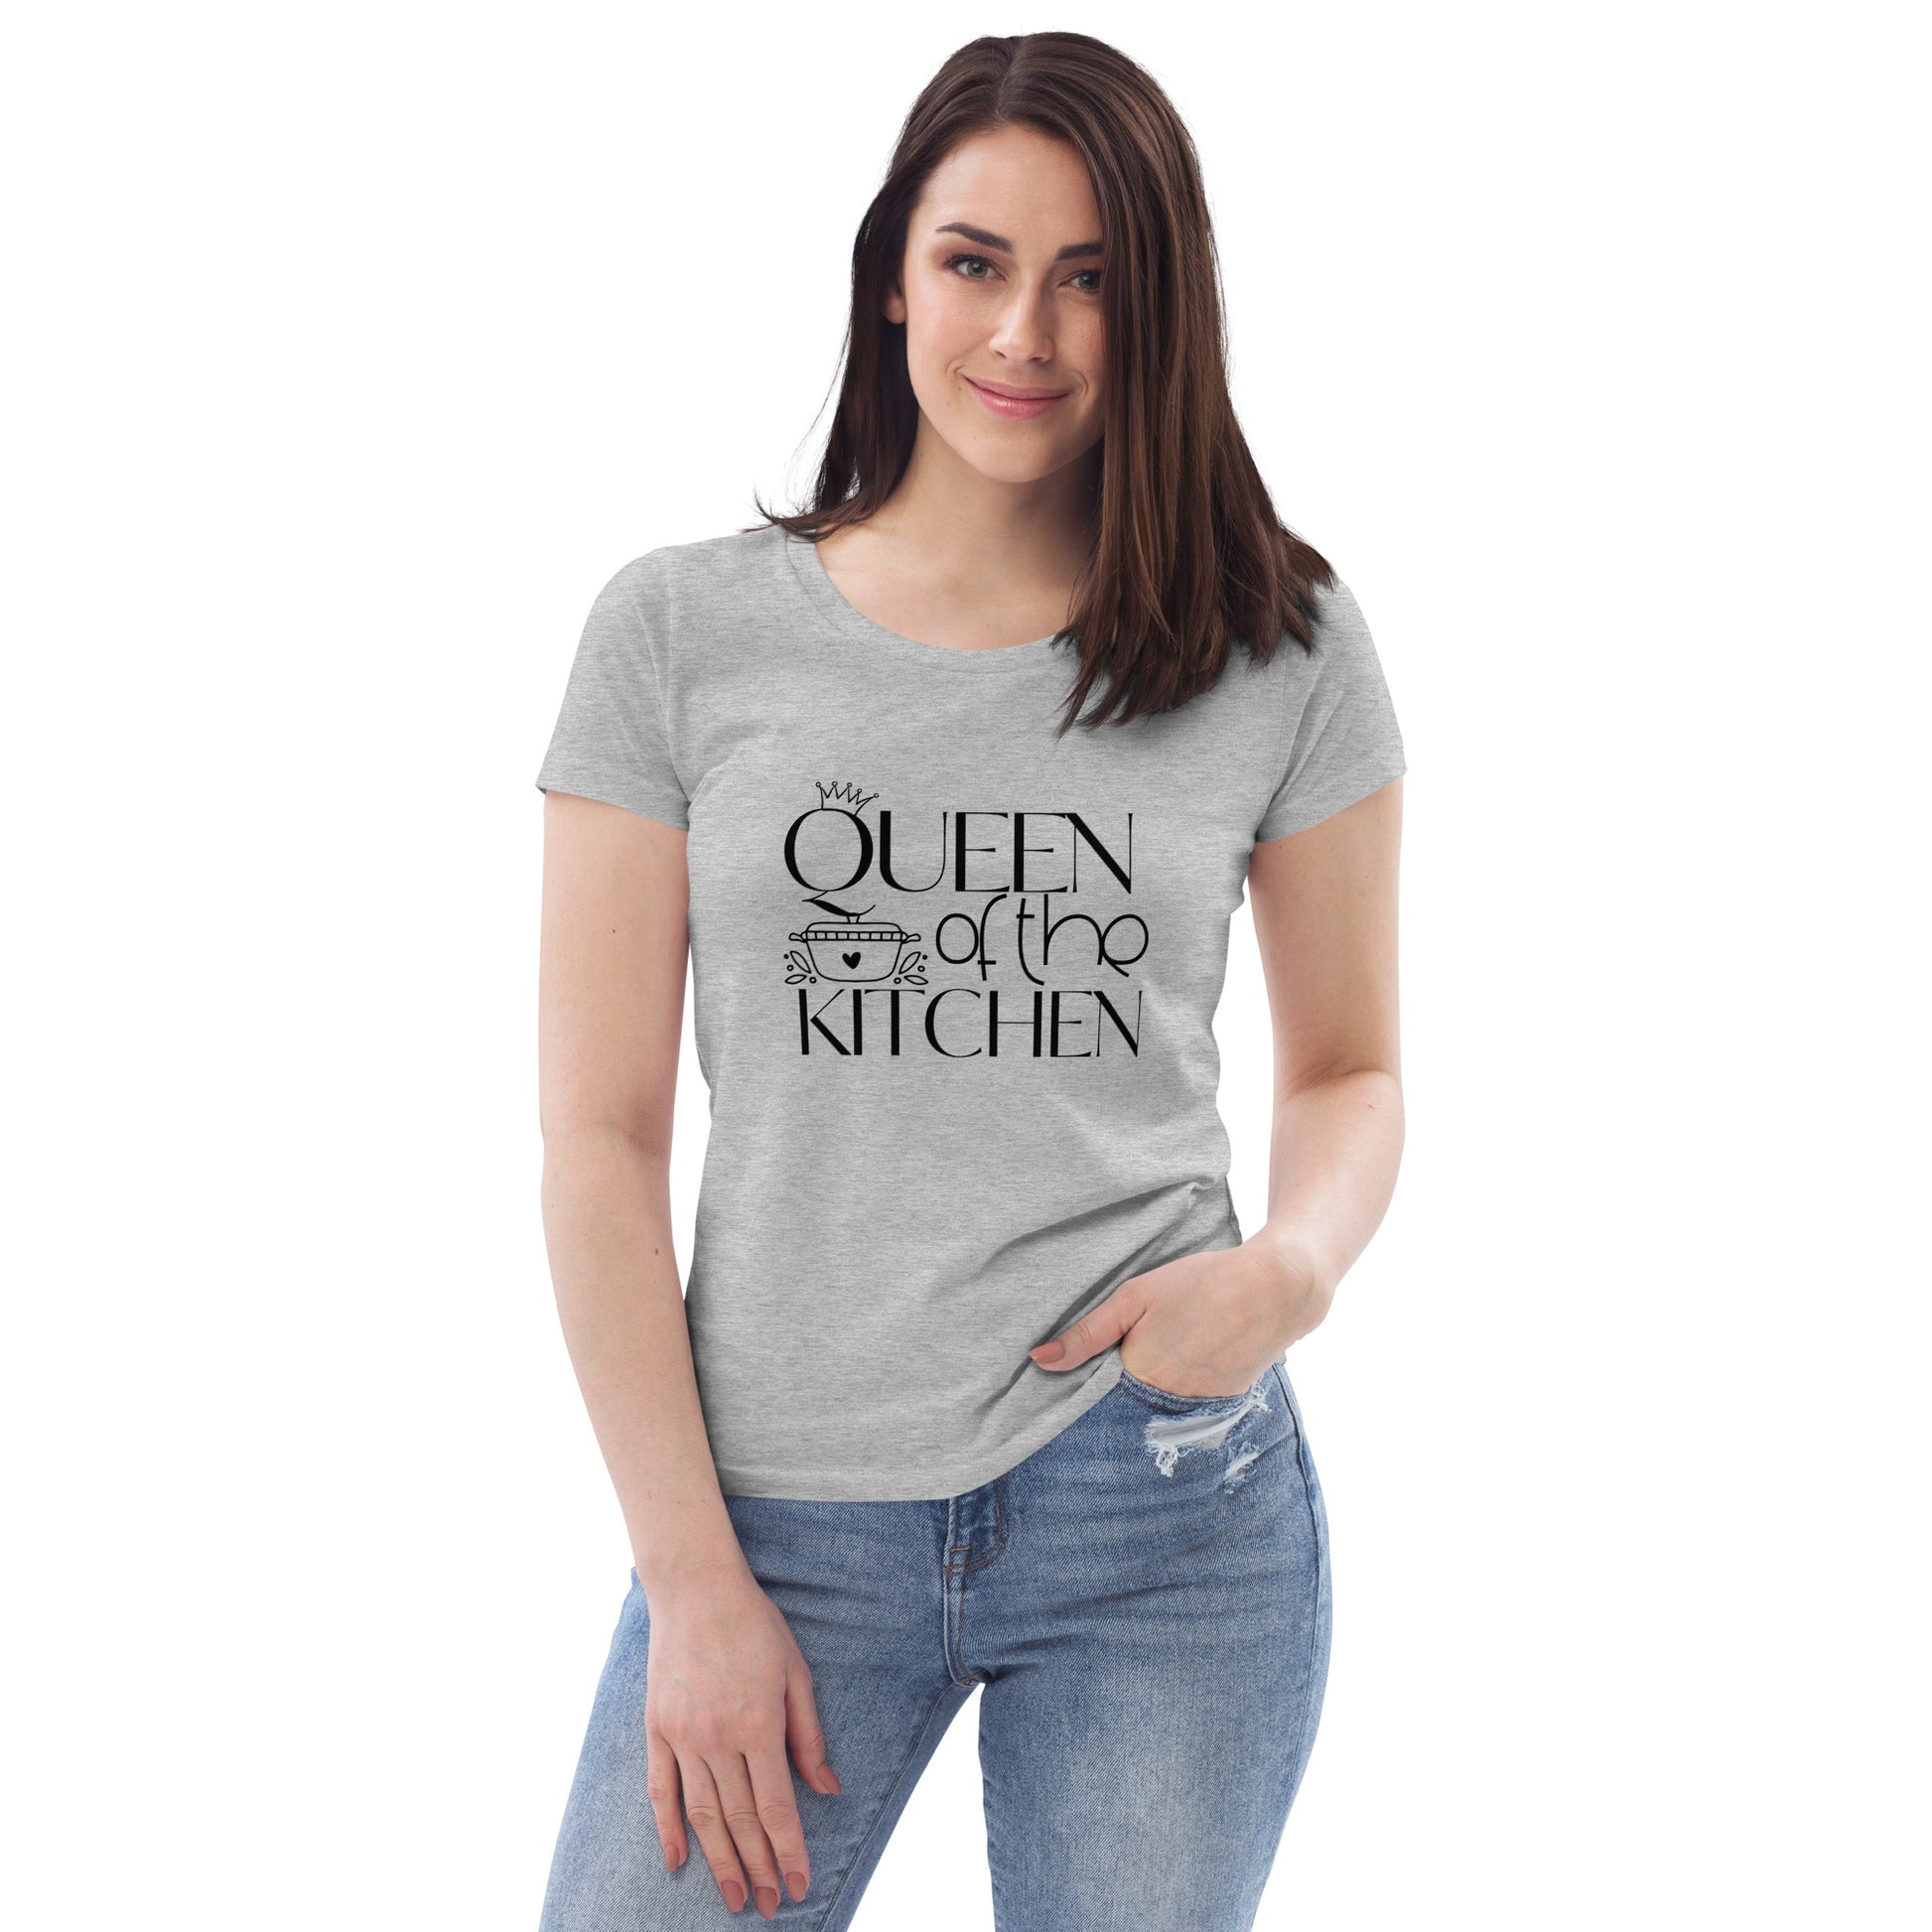 Queen of the kitchen - custom made 100% organic cotton T-Shirt. Perfect for the hobby chef. Color: gray